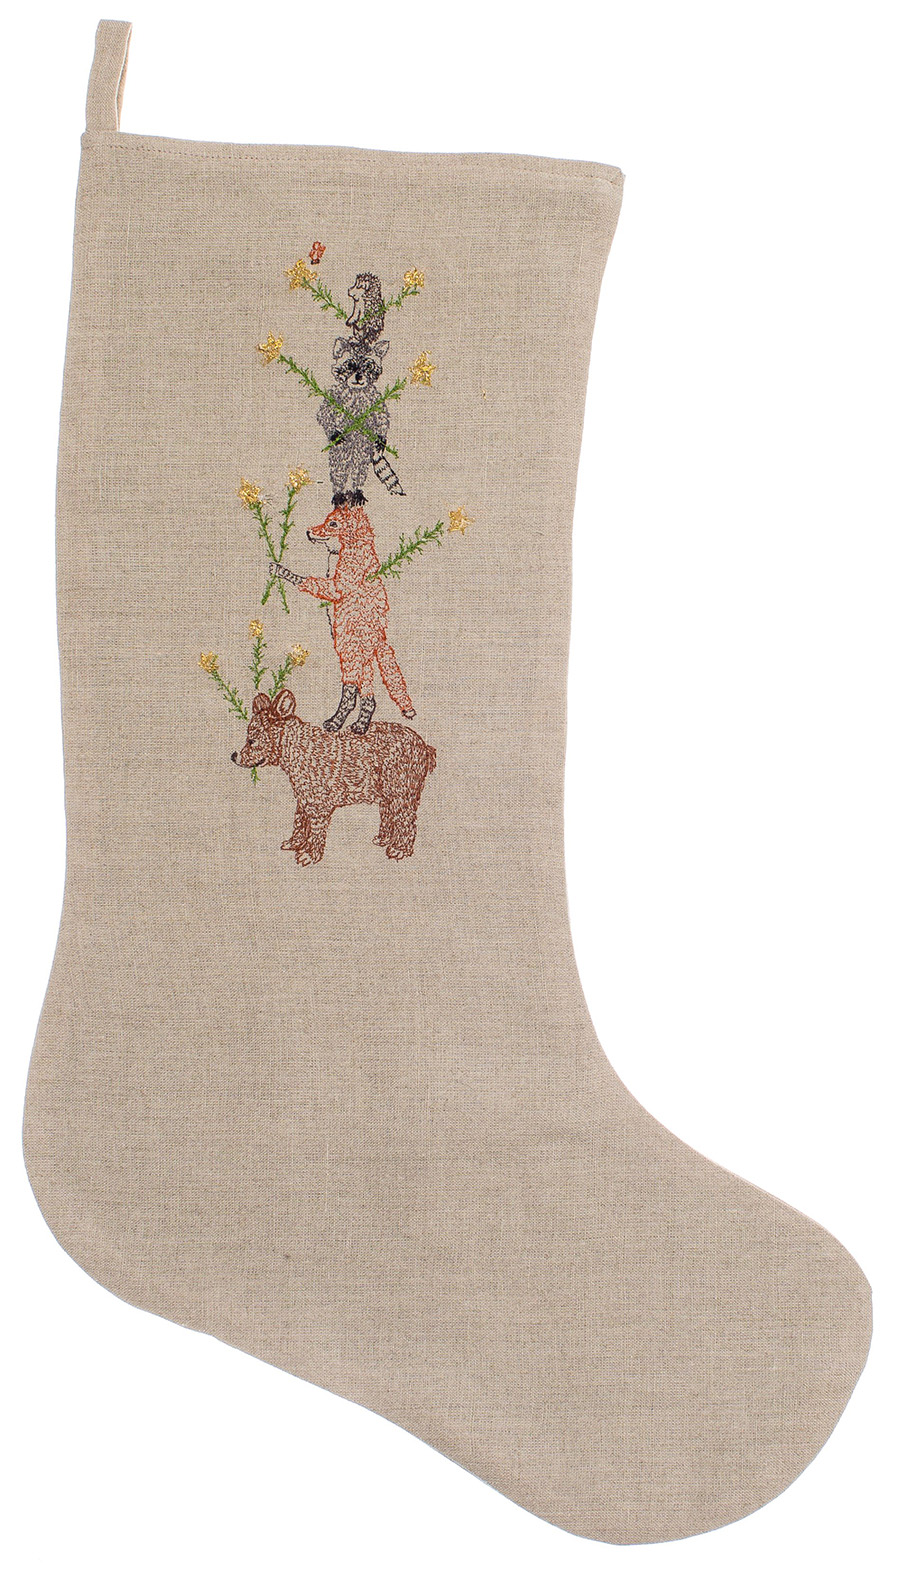 For Mom: Animal Tree Large Stocking by Coral & Tusk